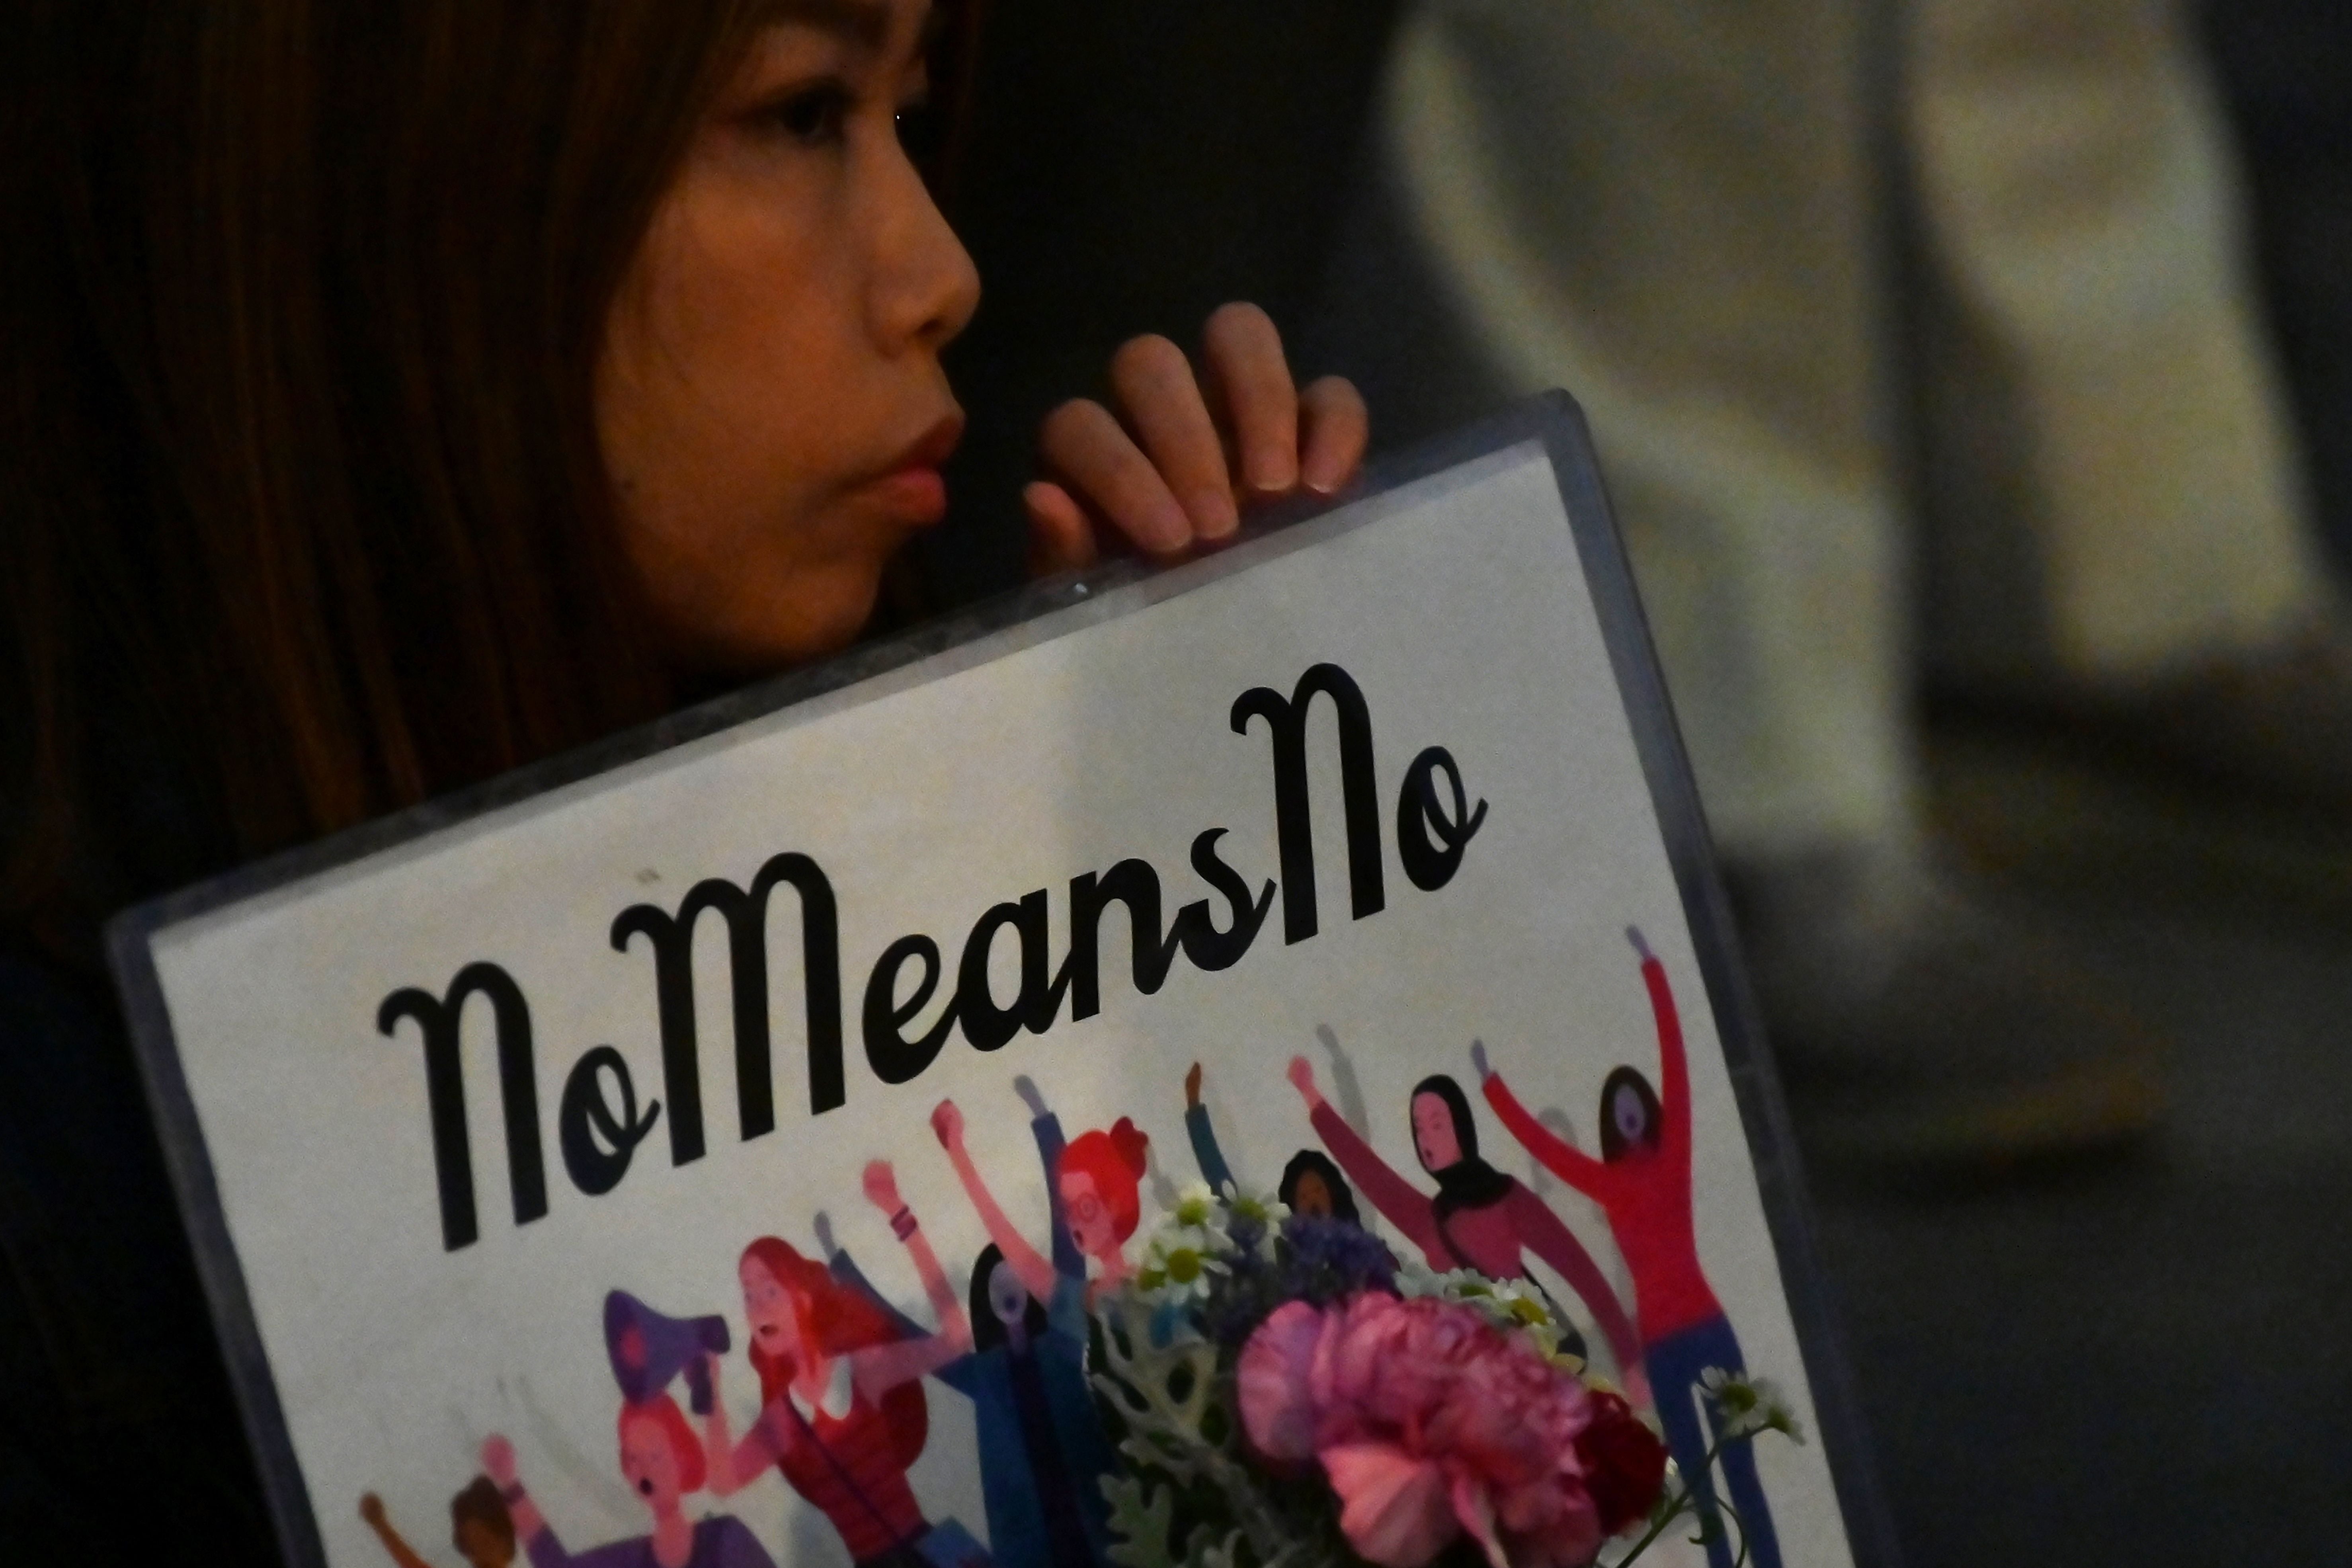 A demonstrator holds a placard during a protest against the lack of substantial legal protection for sexual assault victims in Tokyo in June 2019